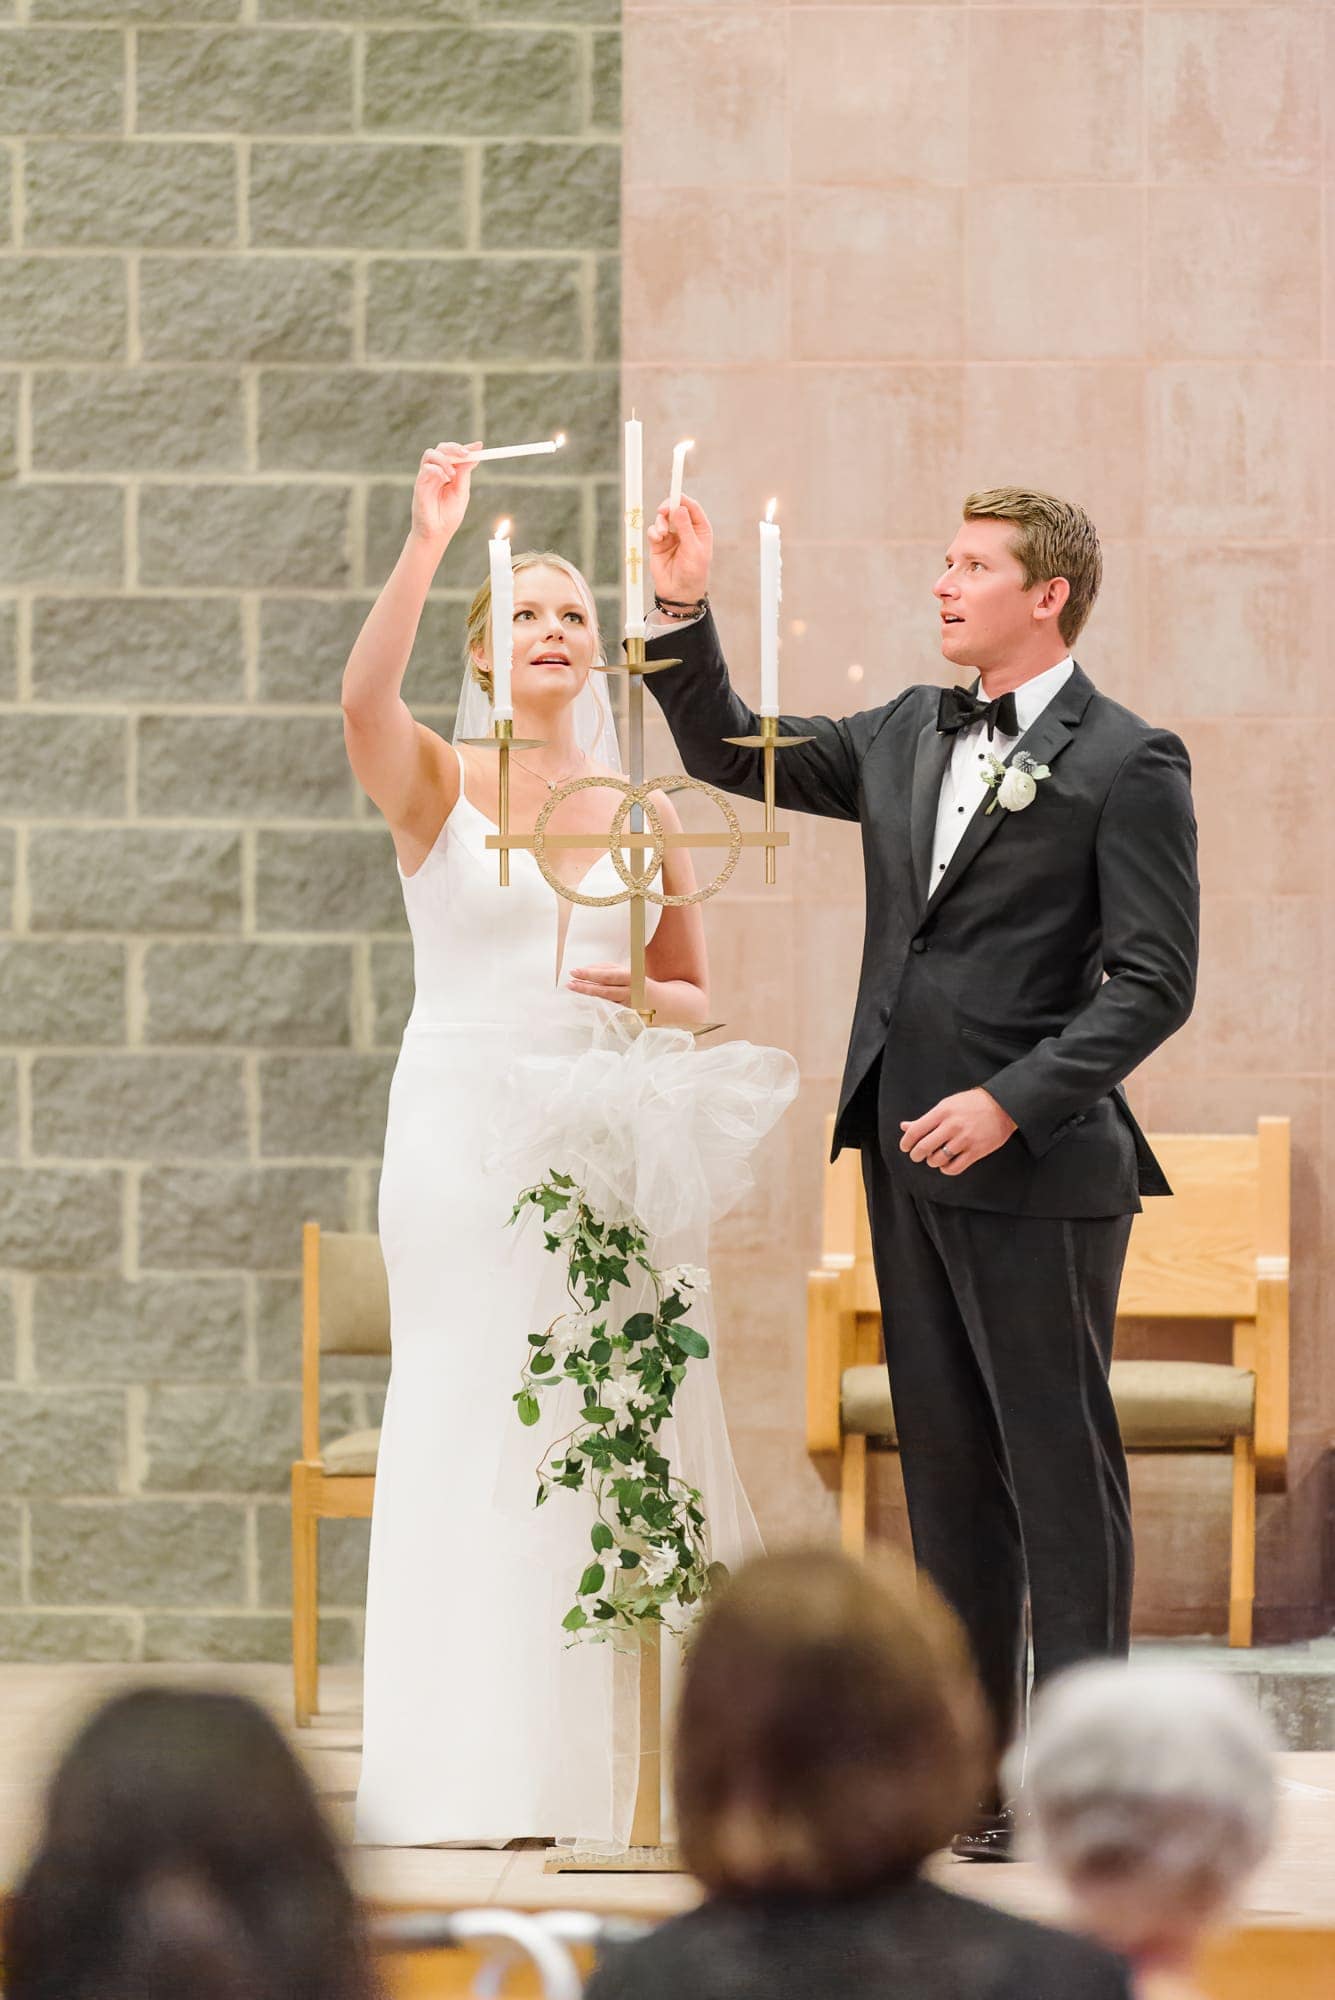 Lauren and Casey light the unity candle at their Catholic ceremony before heading over to their reception at the Longview Country Club in Charlotte.